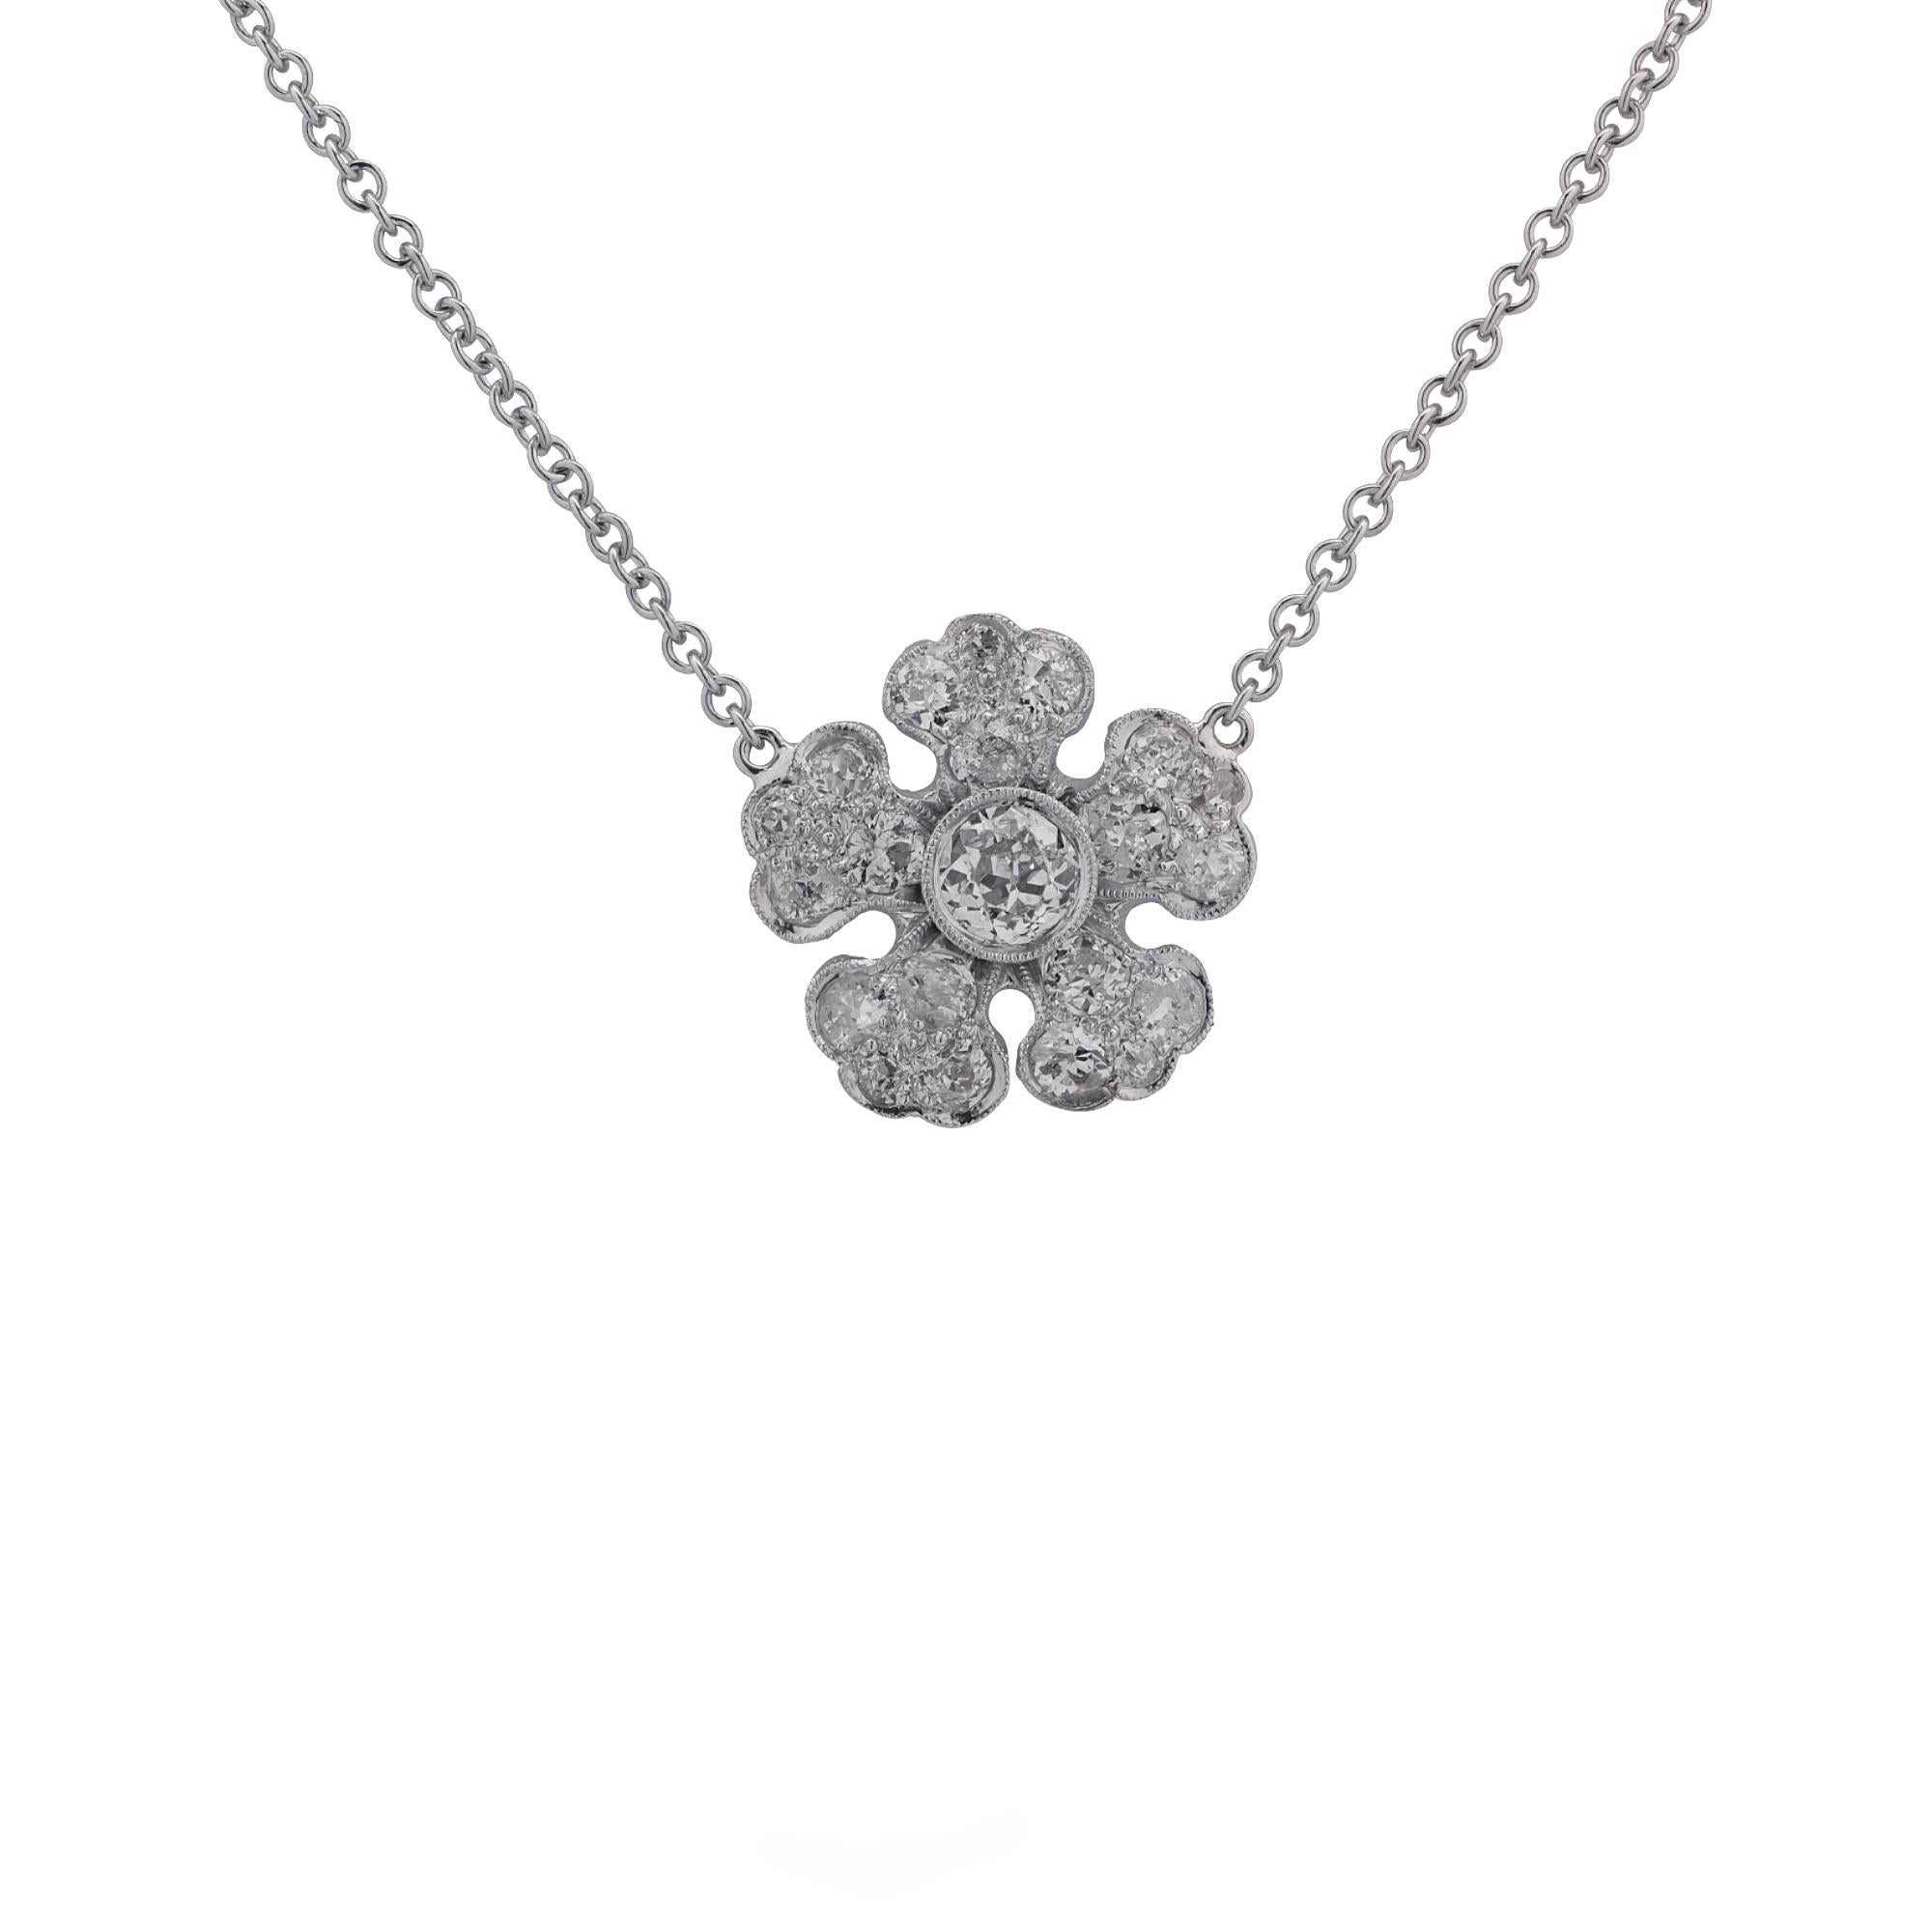 Gorgeous necklace and pendant crafted in platinum and 18 karat white gold featuring 21 European cut diamonds weighing approximately 1.5 carats total, G-J color VS-SI clarity set in a whimsical flower. The 1 mm chain measures 18.5 inches in length.